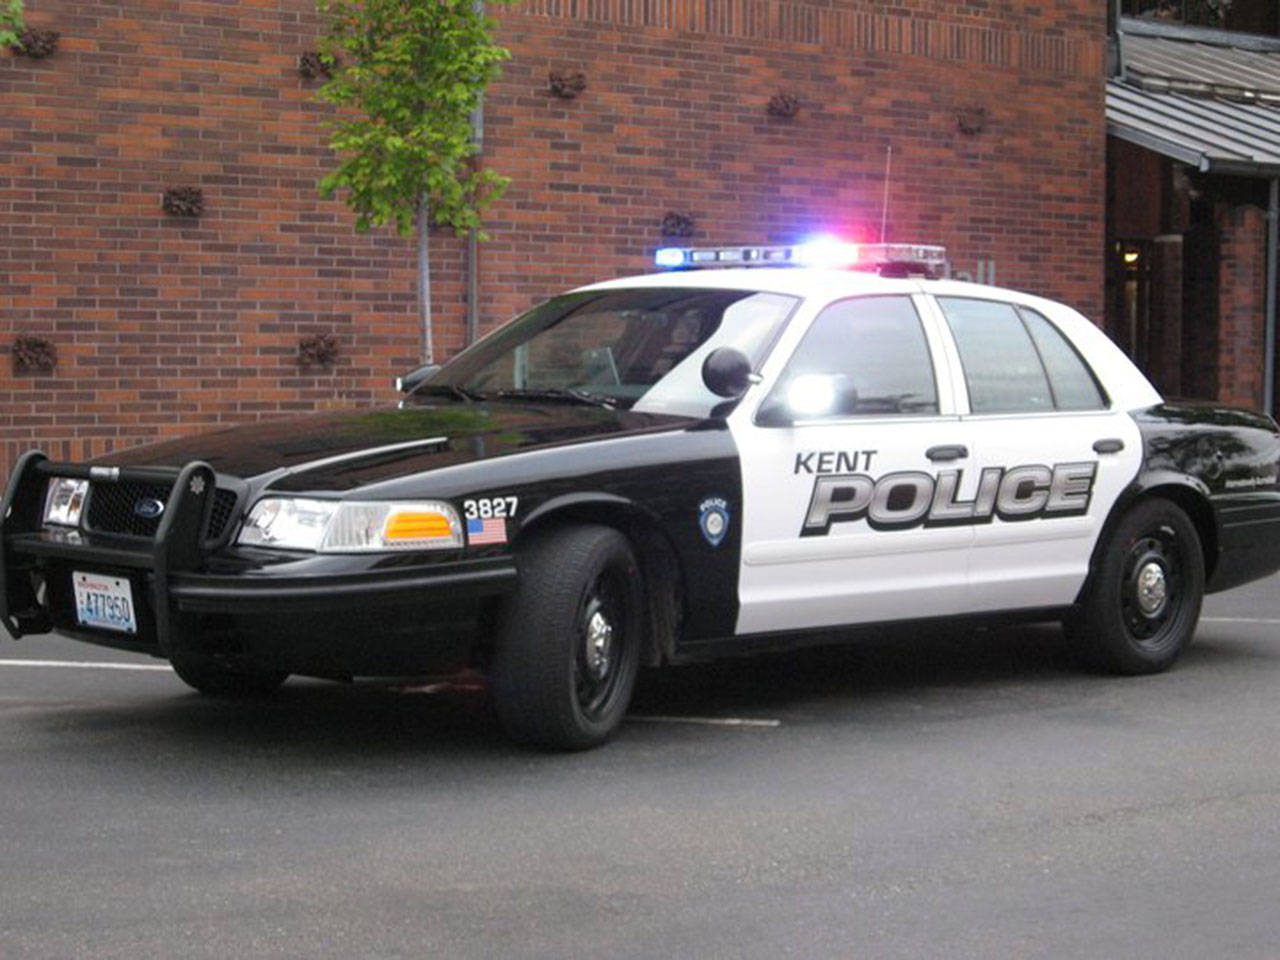 Officers catch naked man walking streets of Kent | Police Blotter